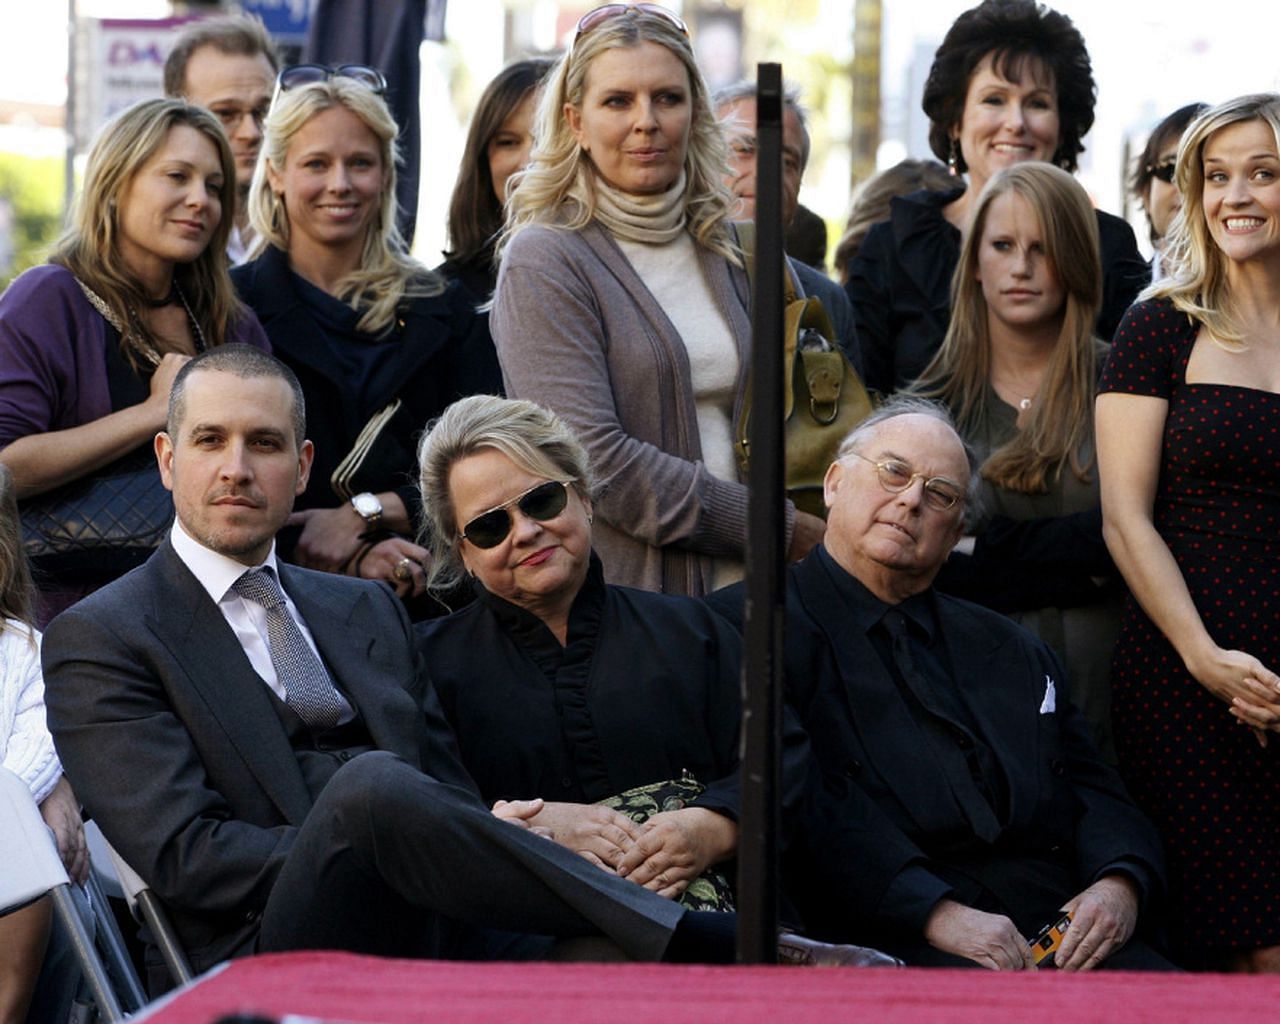 Reese Witherspoon, John Draper Witherspoon, Mary Elizabeth Witherspoon, Jim Toth at the unveiling of her star on the Hollywood Walk of Fame (Image via Alamy)